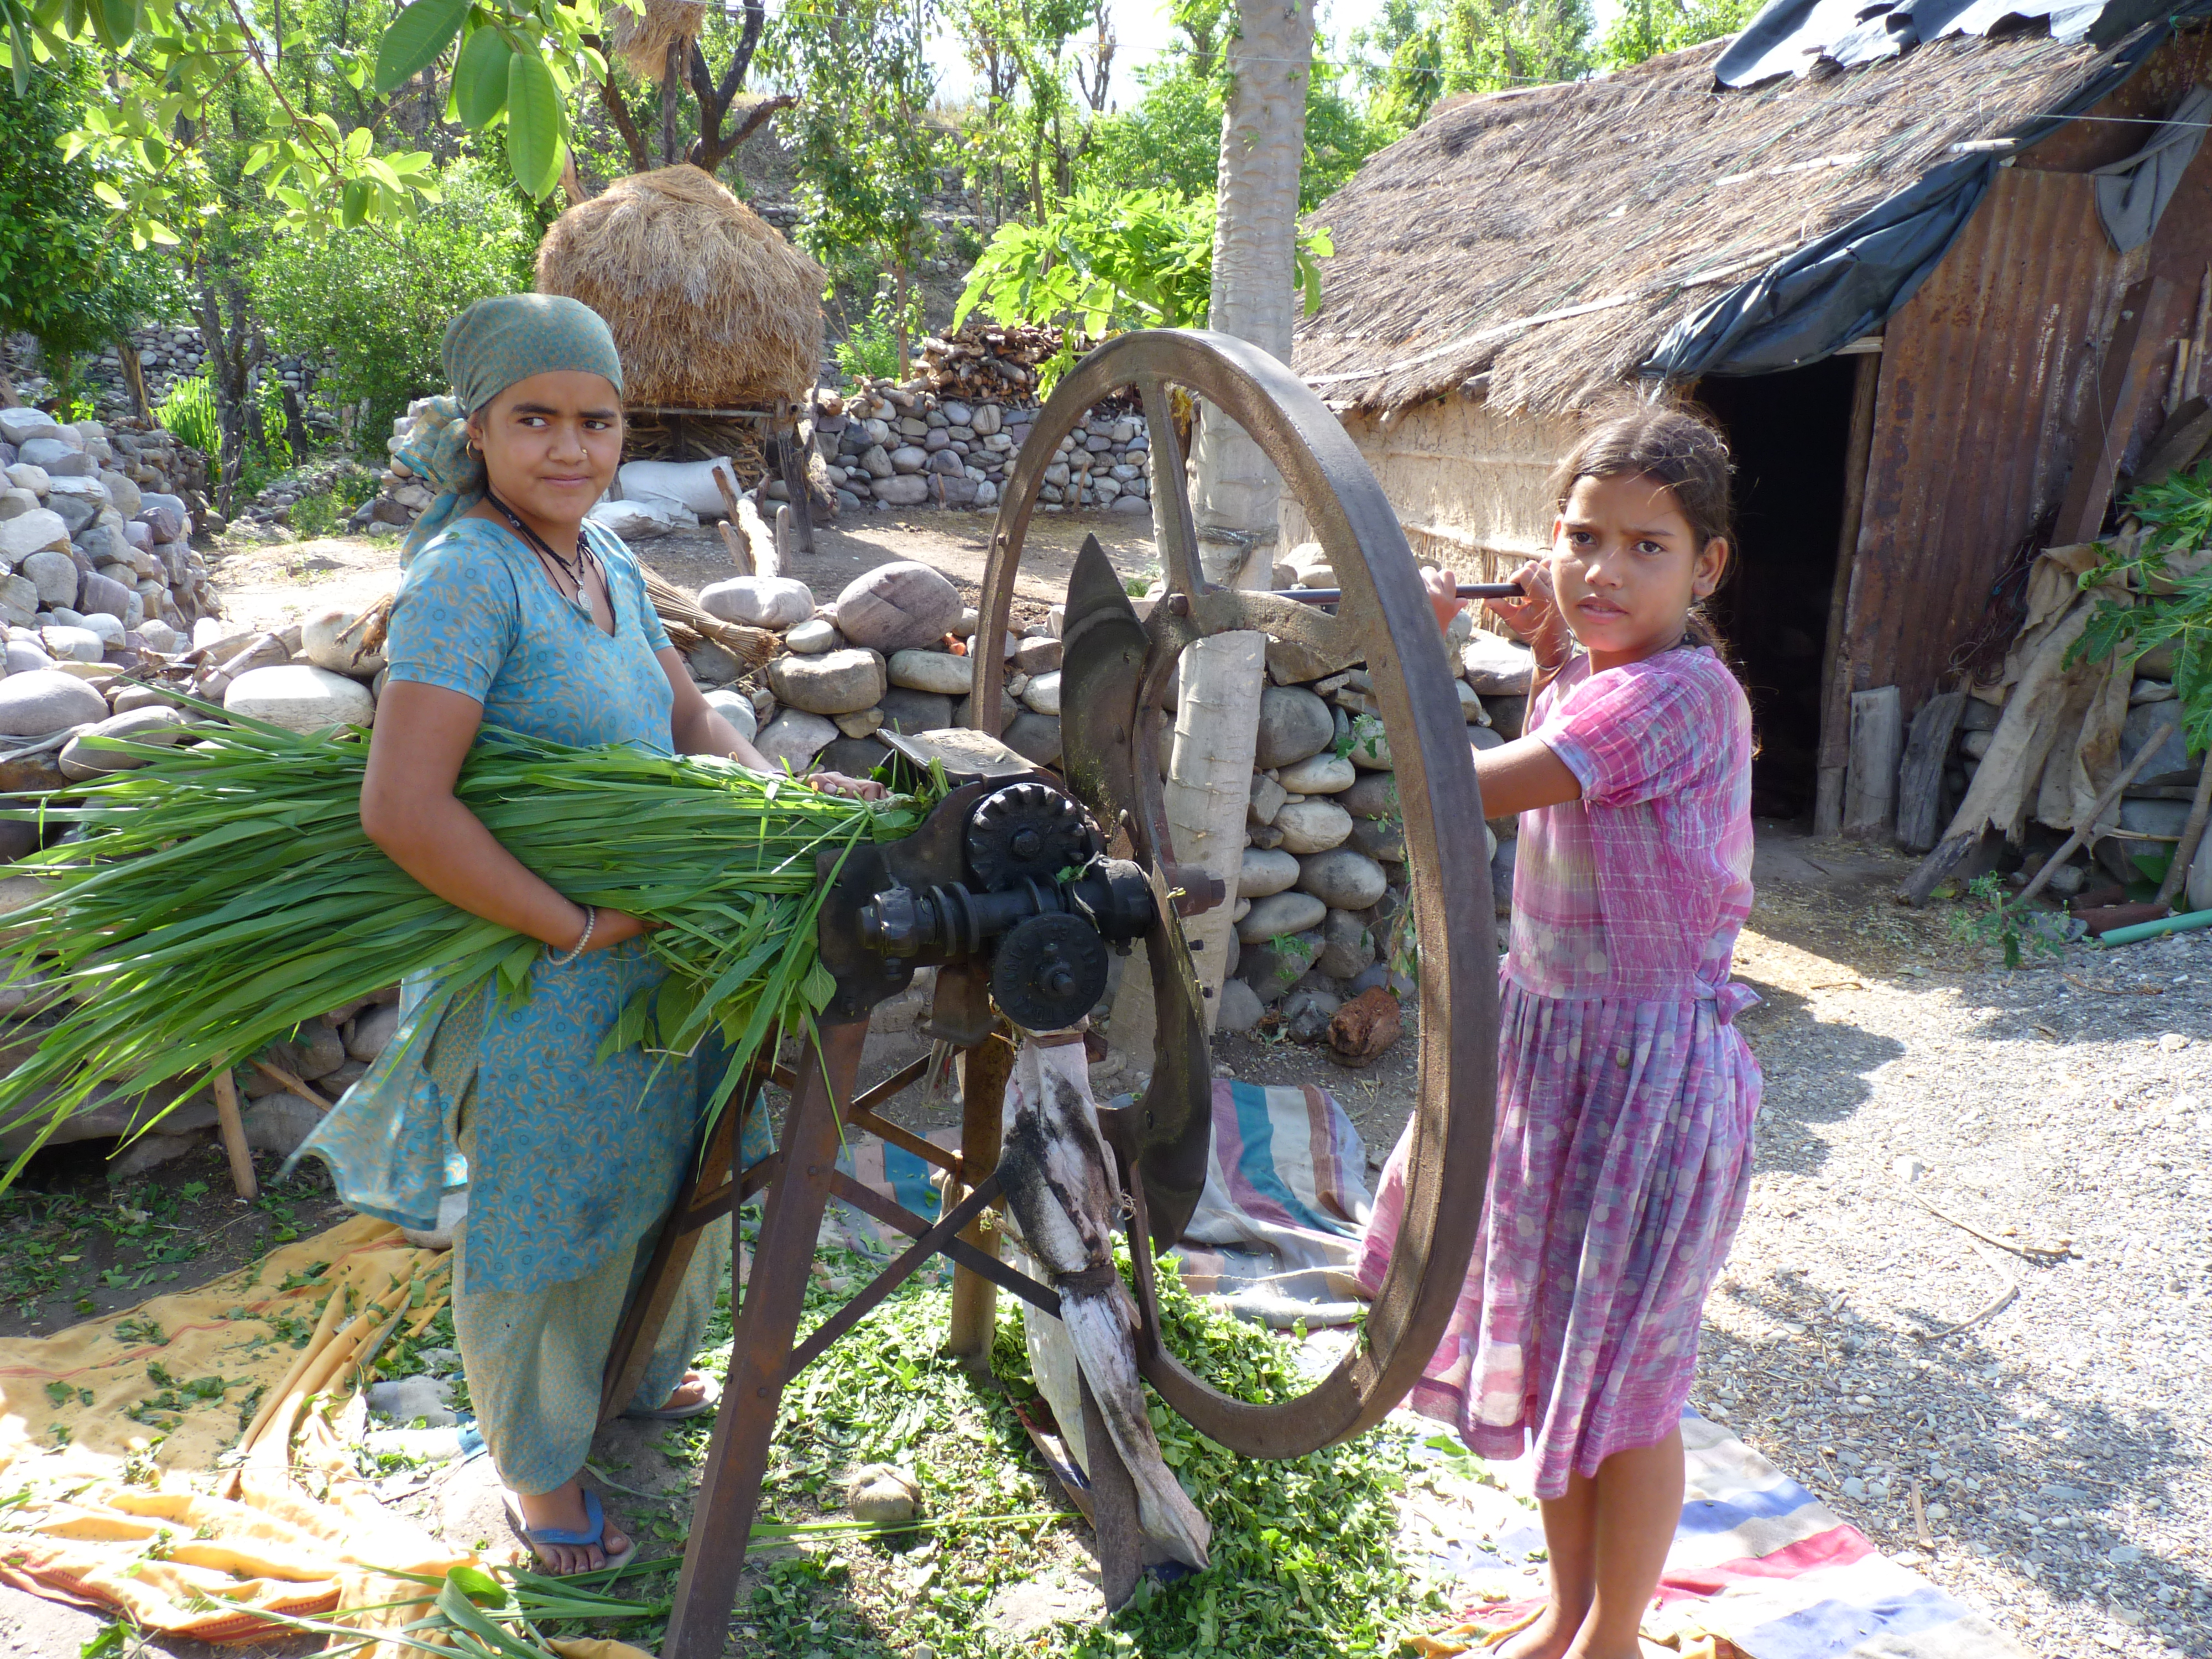 Two women work a threshing machine, one older than other.